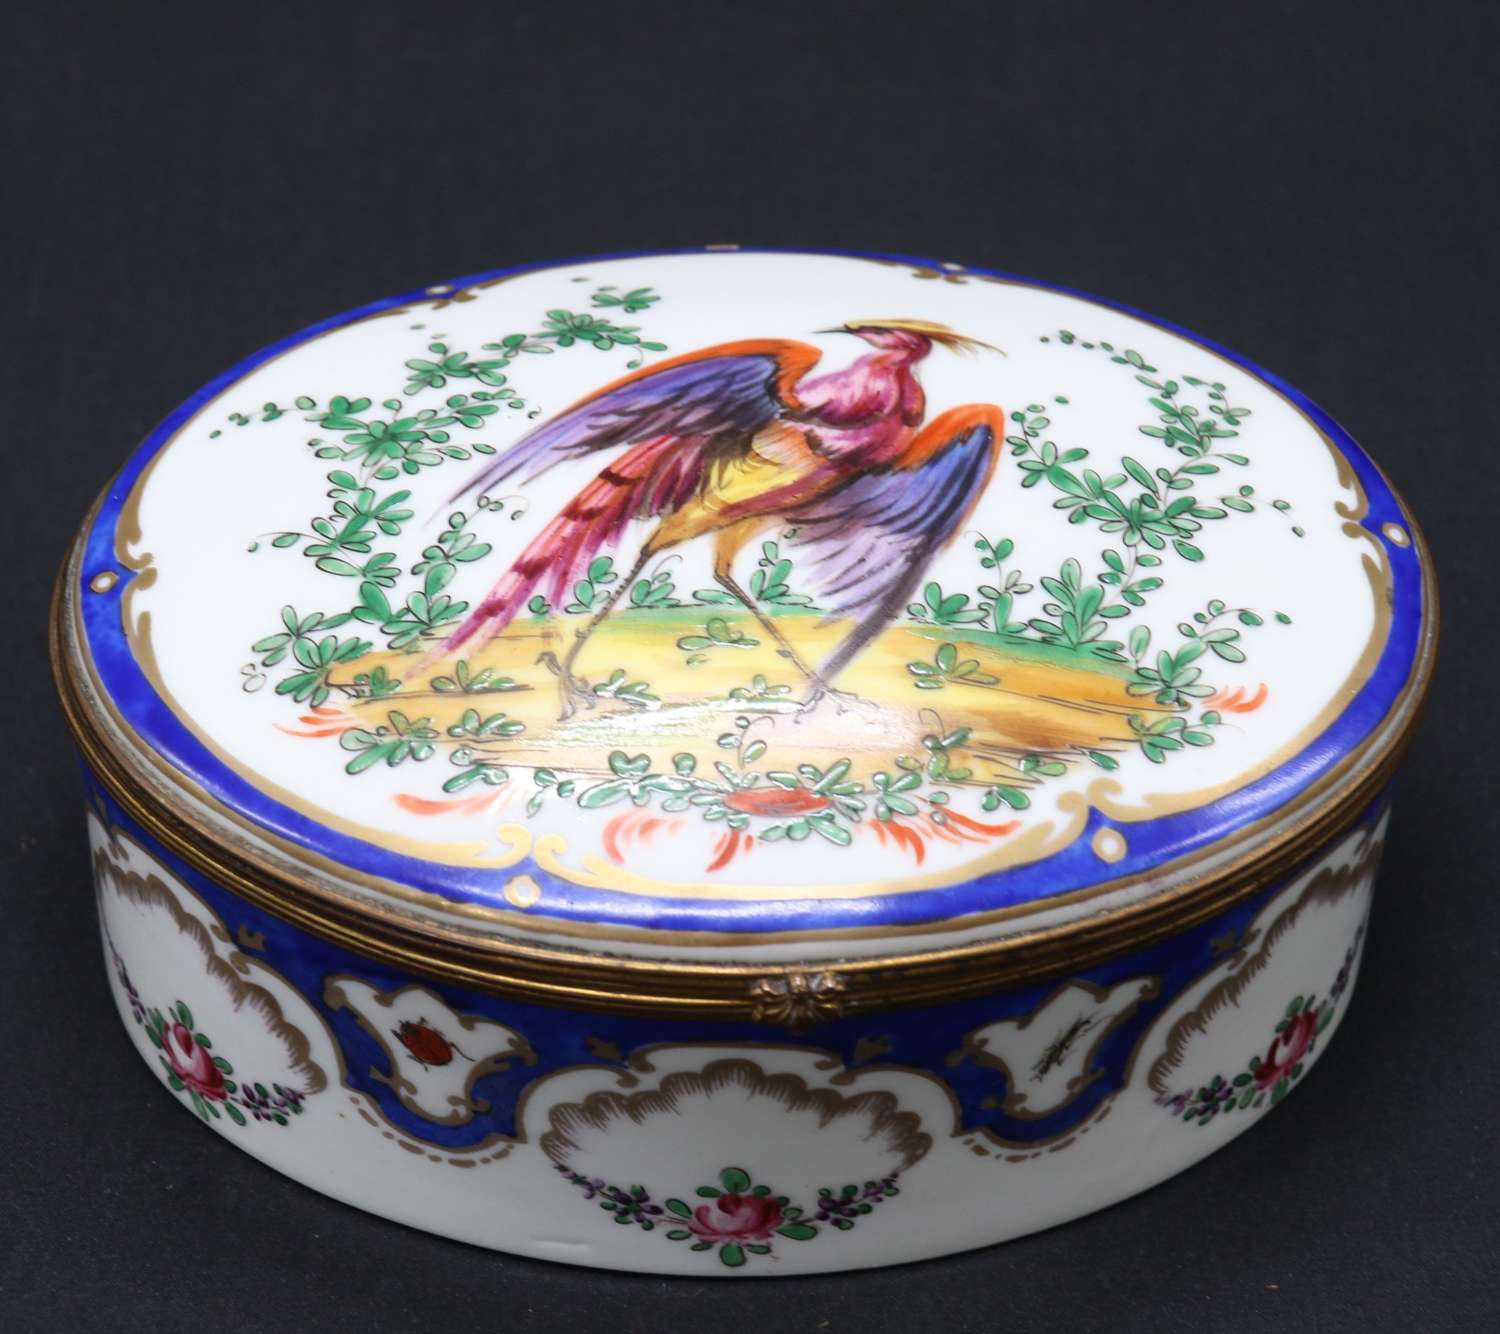 19th century French hand painted oval porcelain box by Samson of Paris